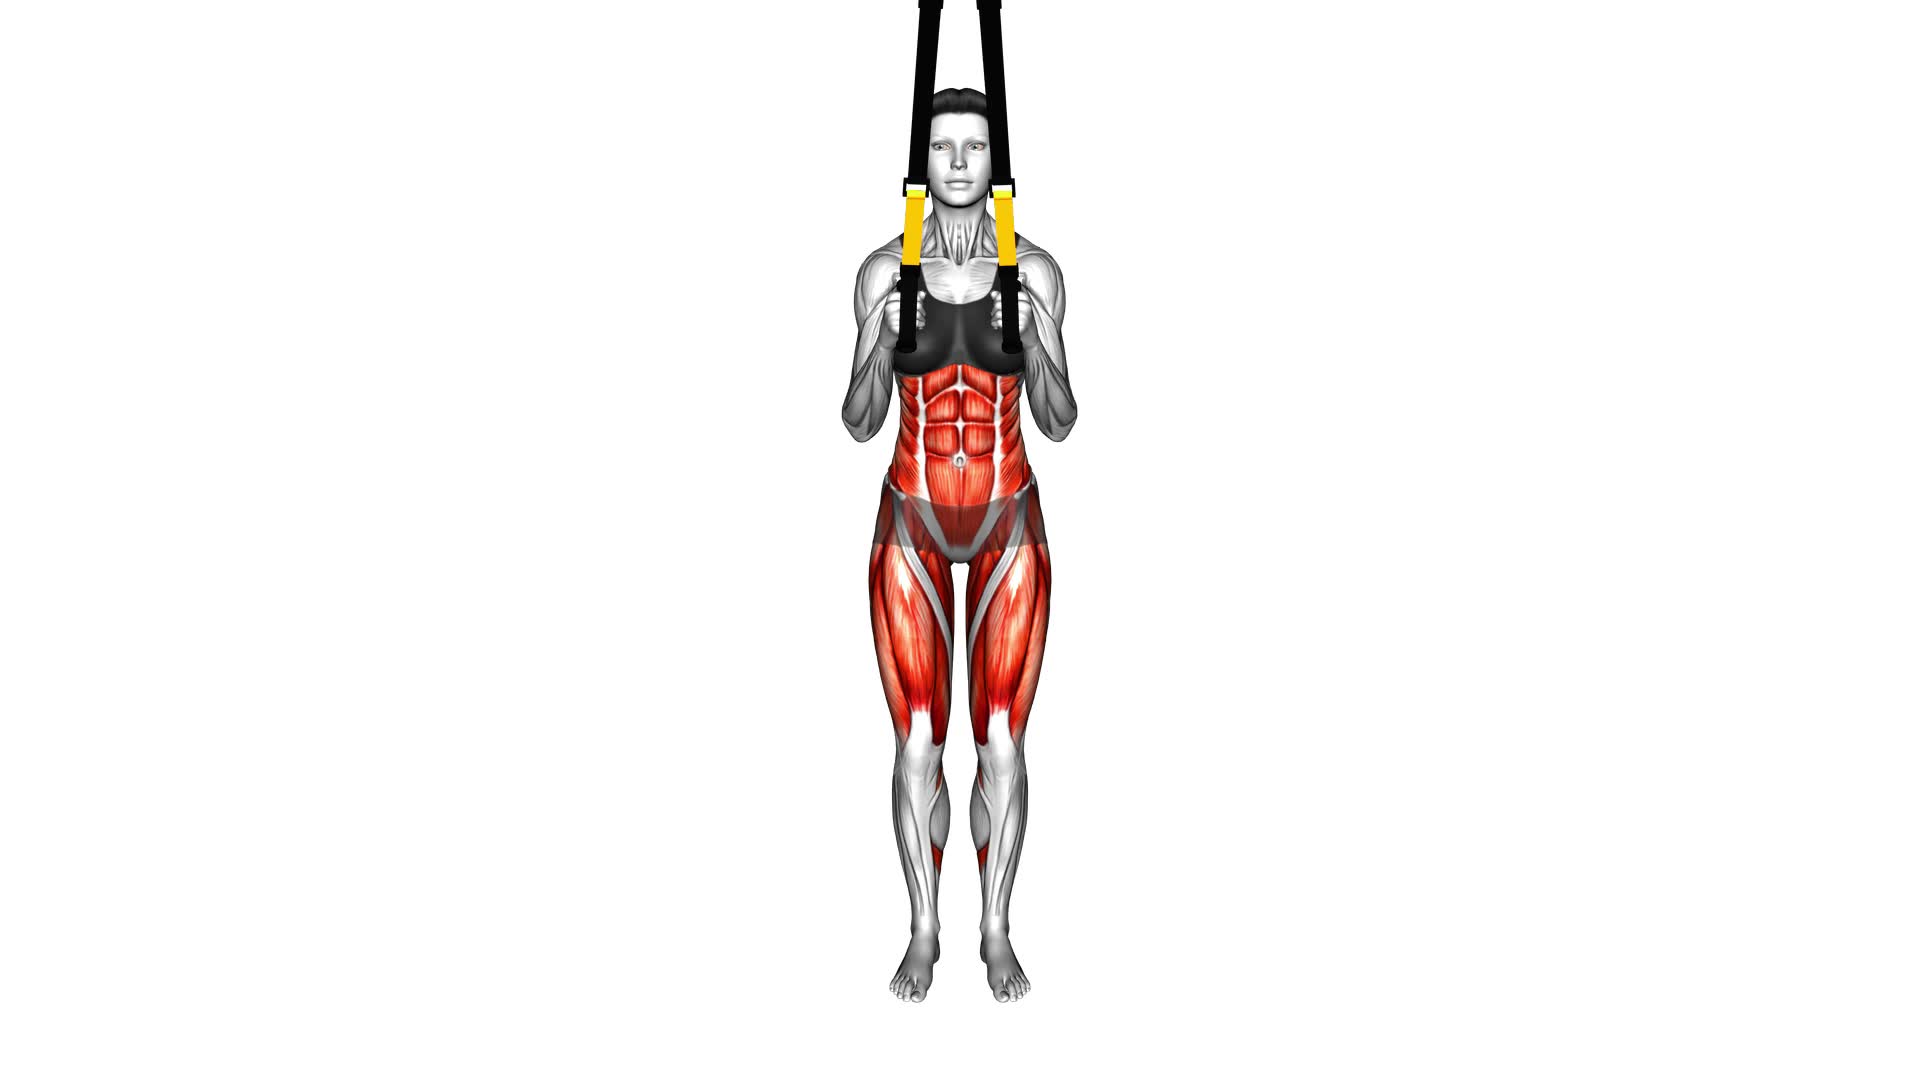 Suspender Side Lunge (female) - Video Exercise Guide & Tips